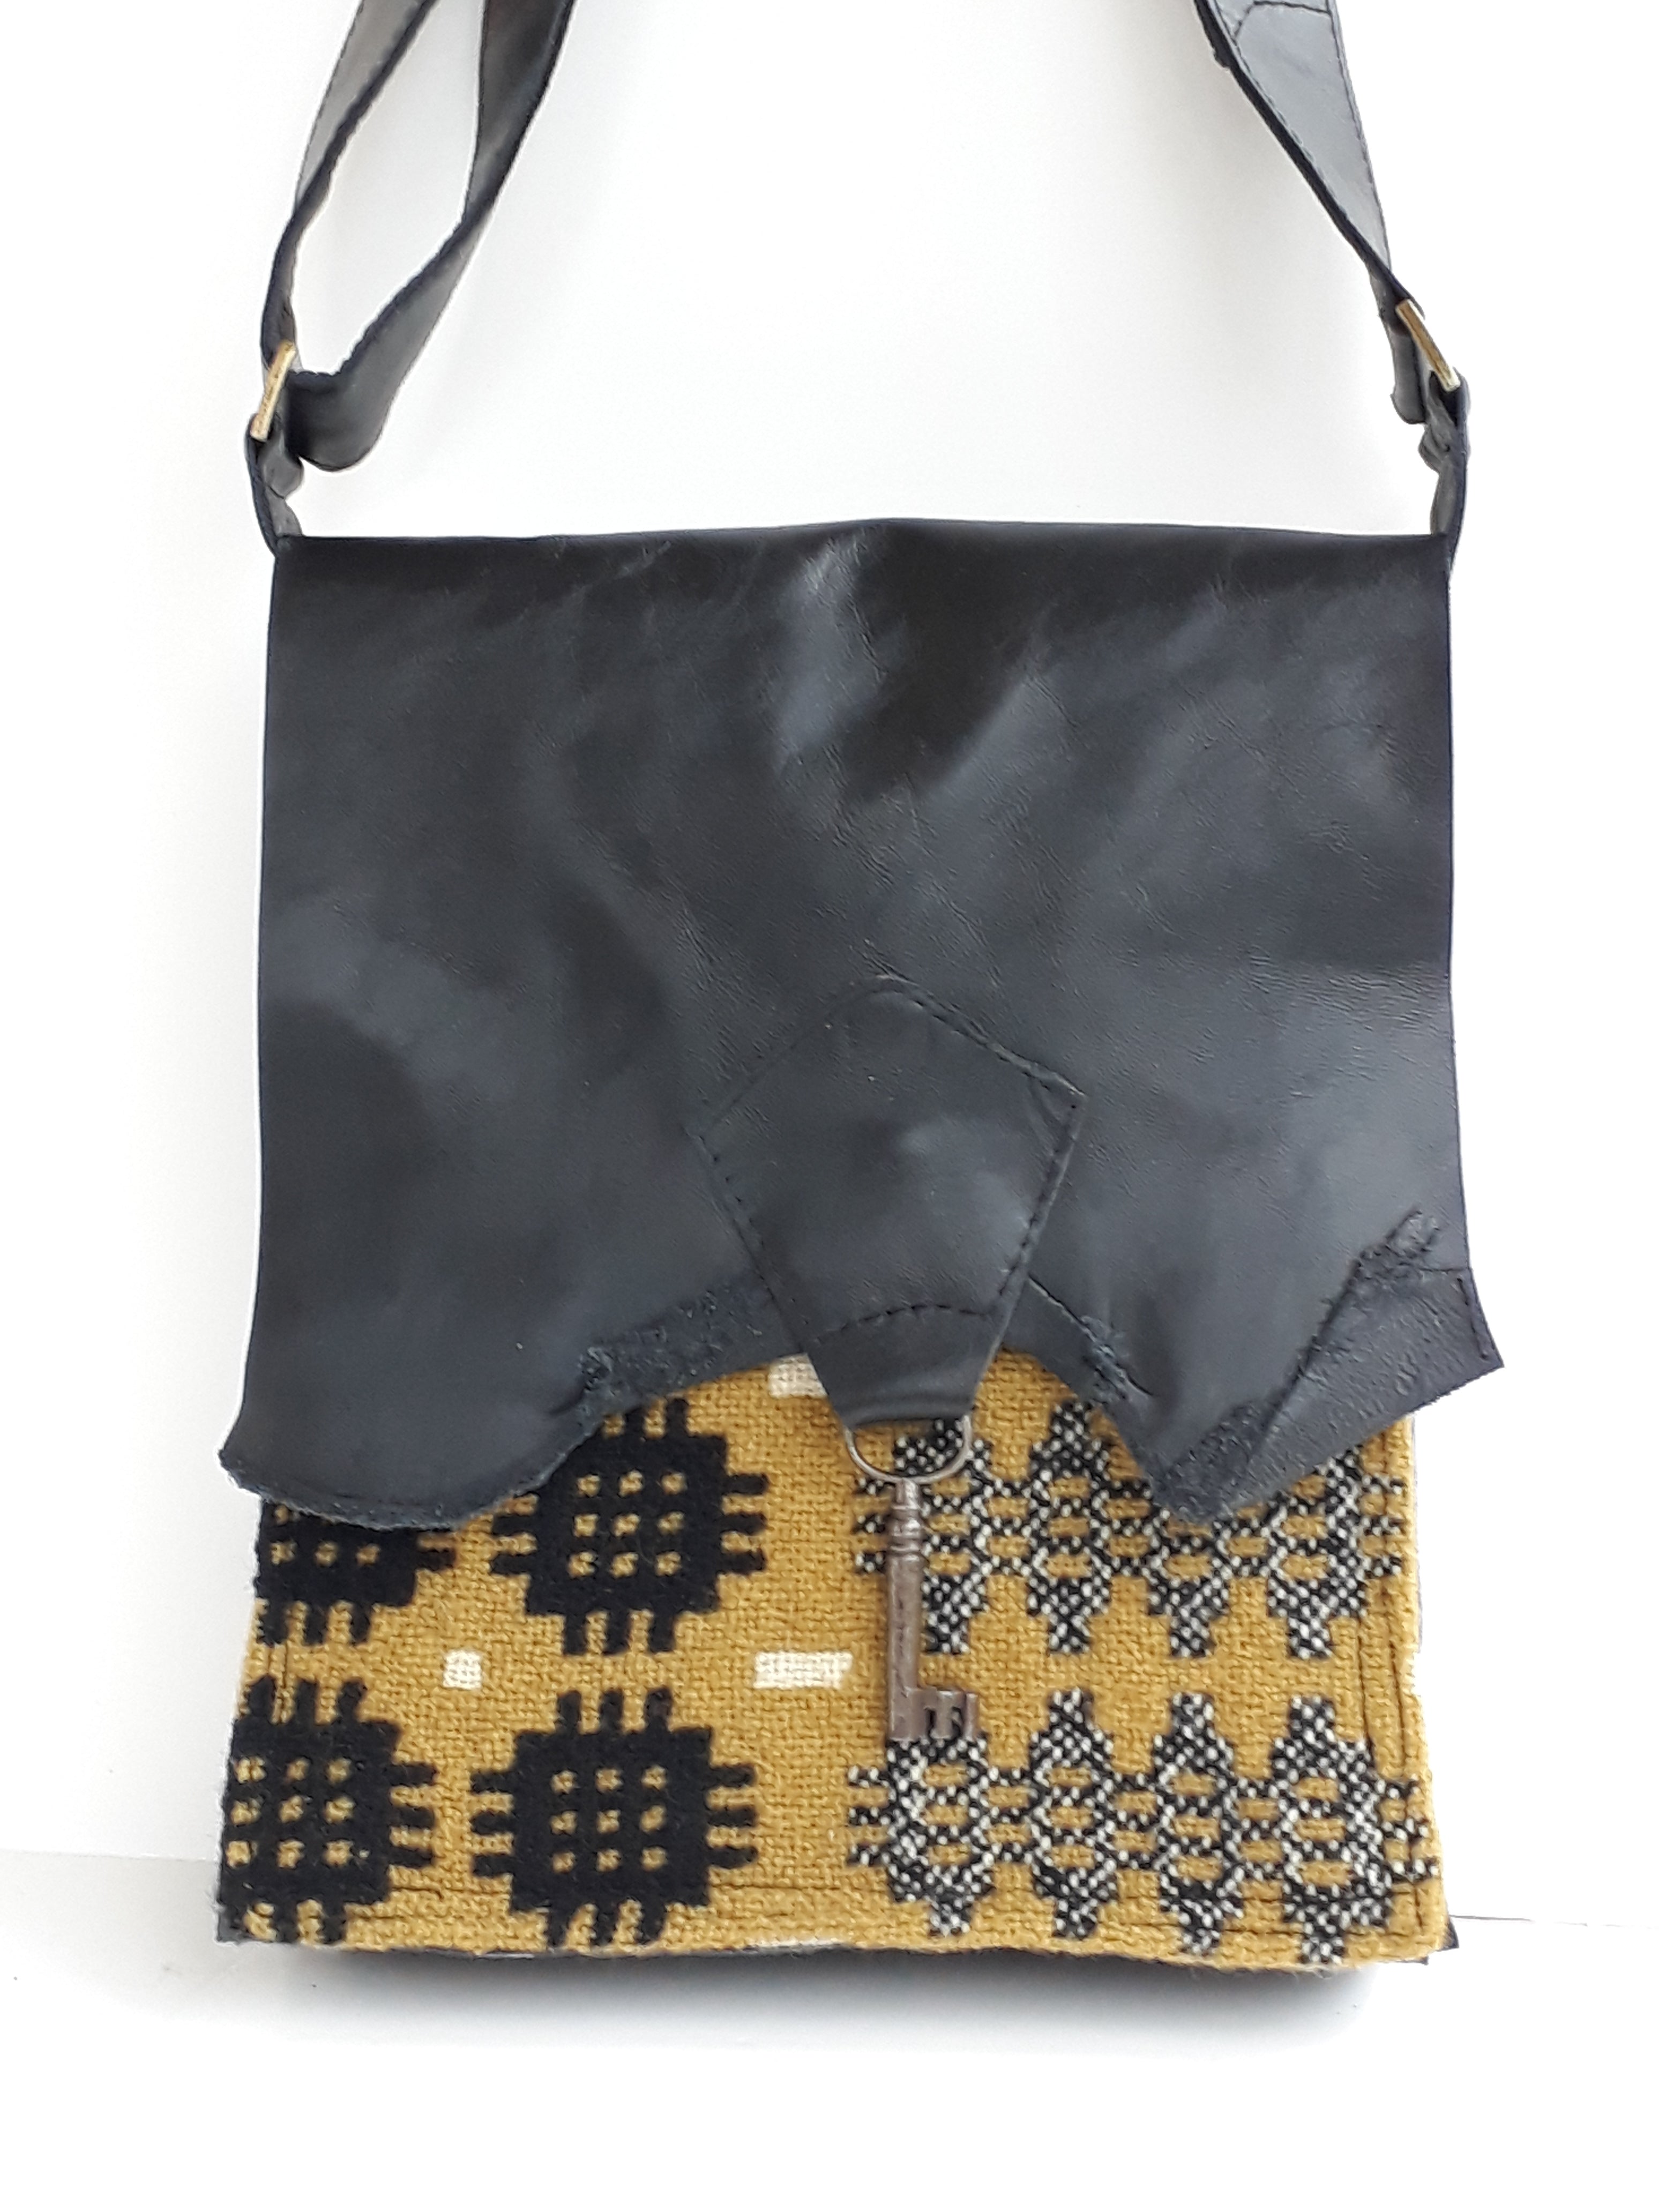 Raw Edge Leather & Welsh Wool Bag with Vintage Key Detail - Mustard & Black - Coterie Leather Bags